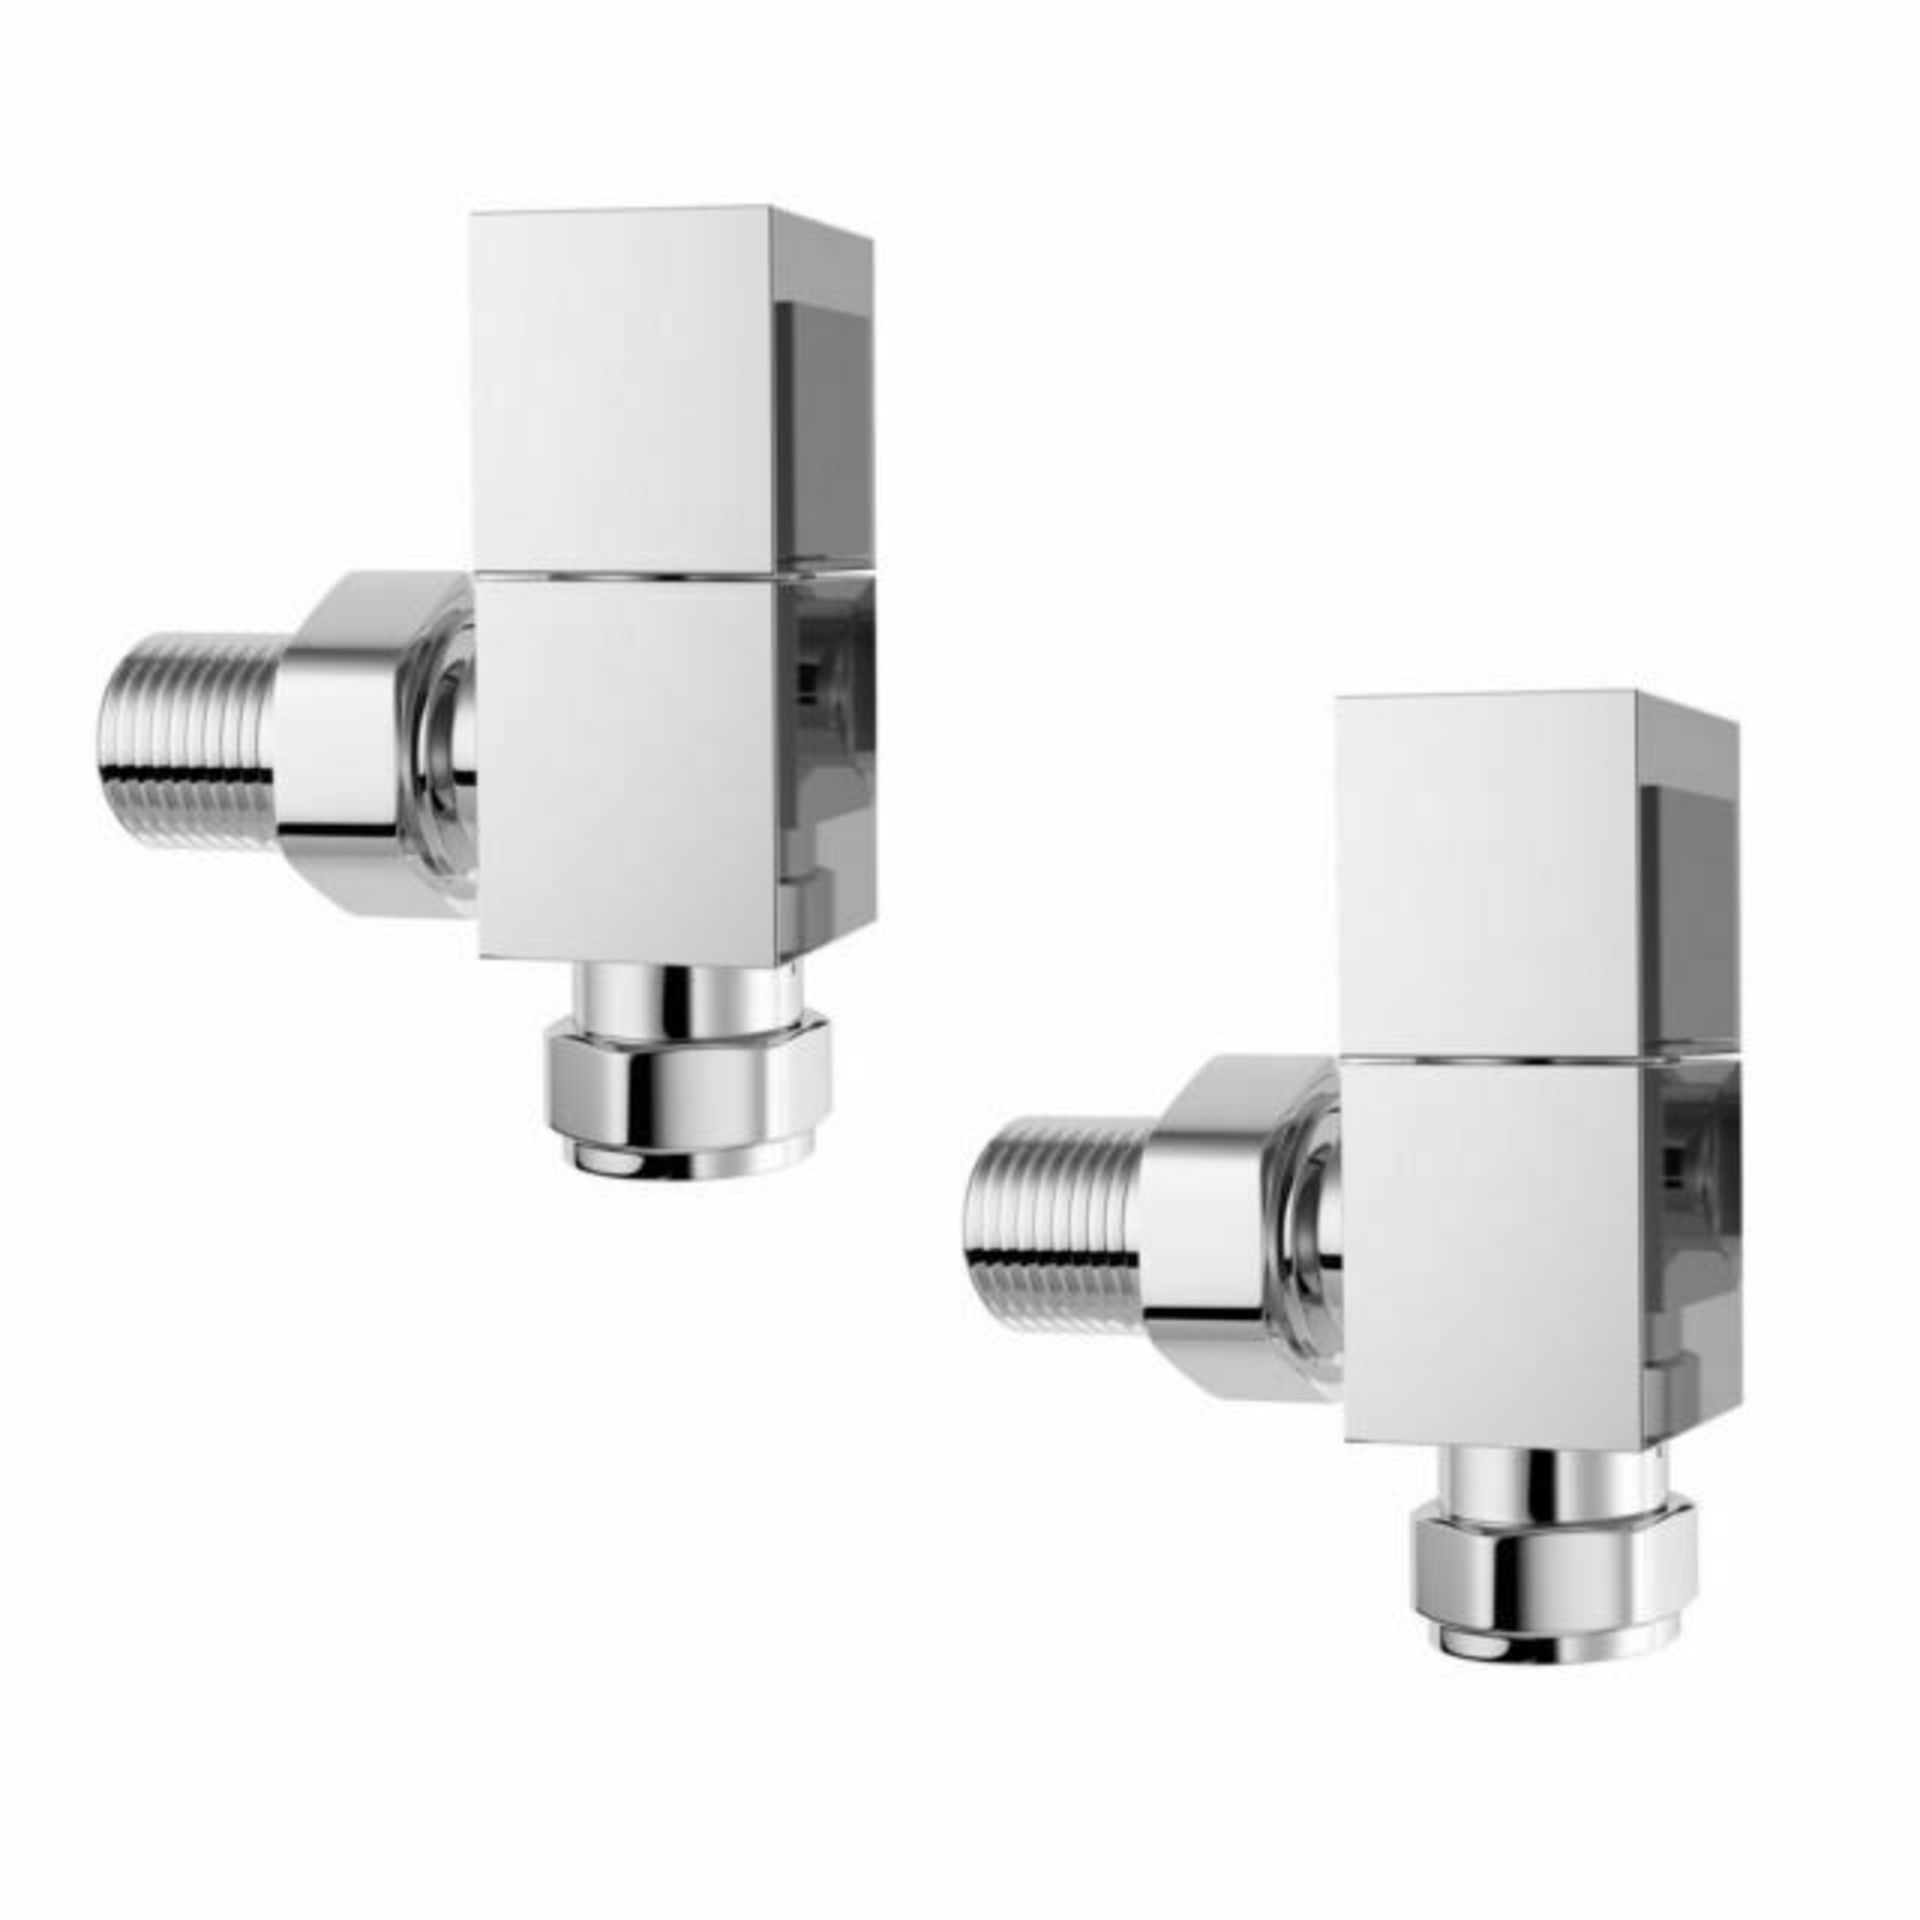 Square Chrome Angled Radiator Valves 15mm Central Heating Taps RA35A. Chrome Plated Solid Brass... - Image 2 of 2